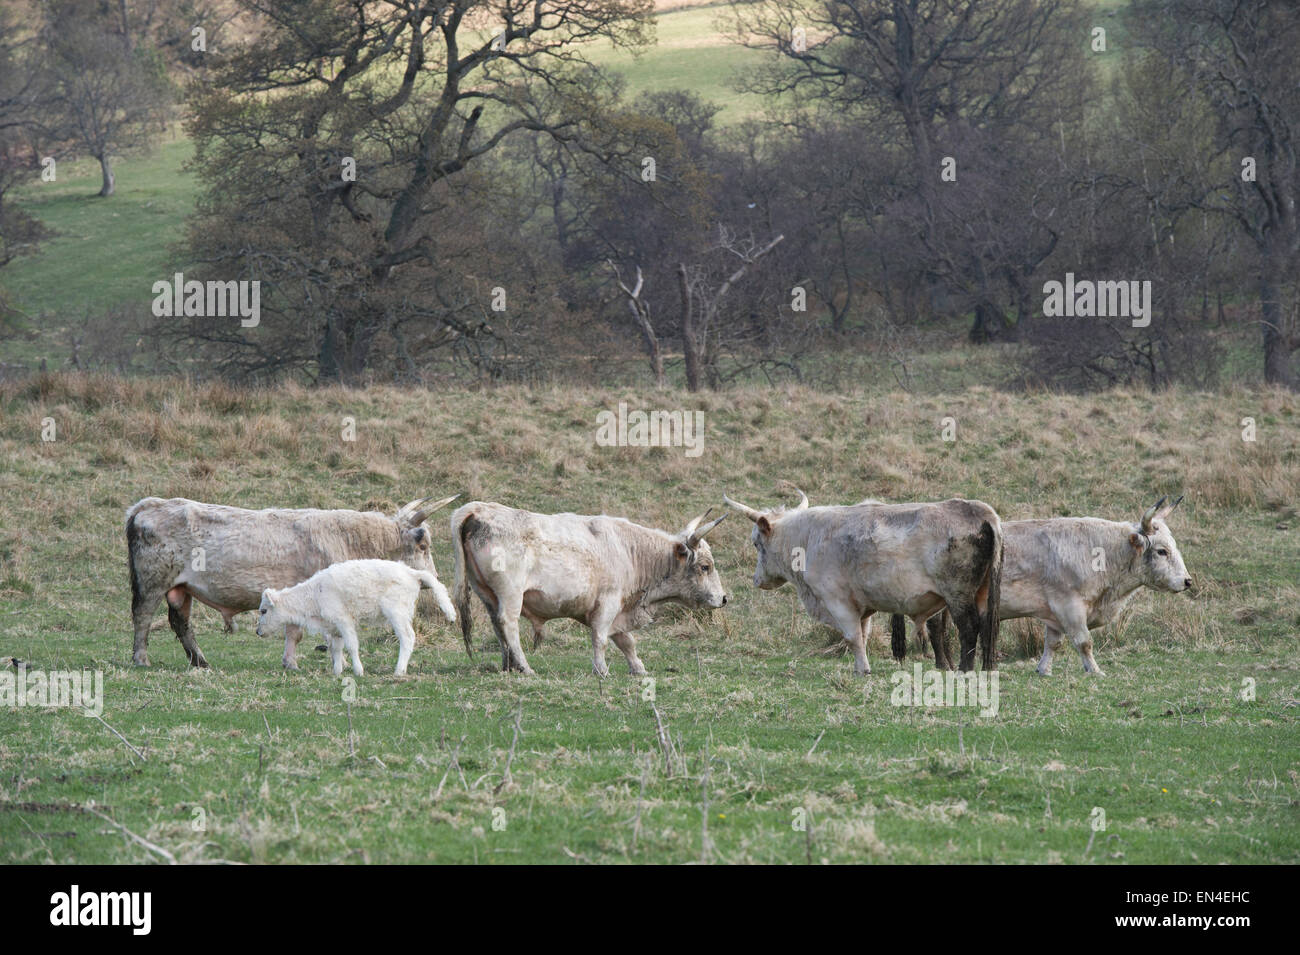 Sauvage chillingham cattle. Le Northumberland. L'Angleterre Banque D'Images